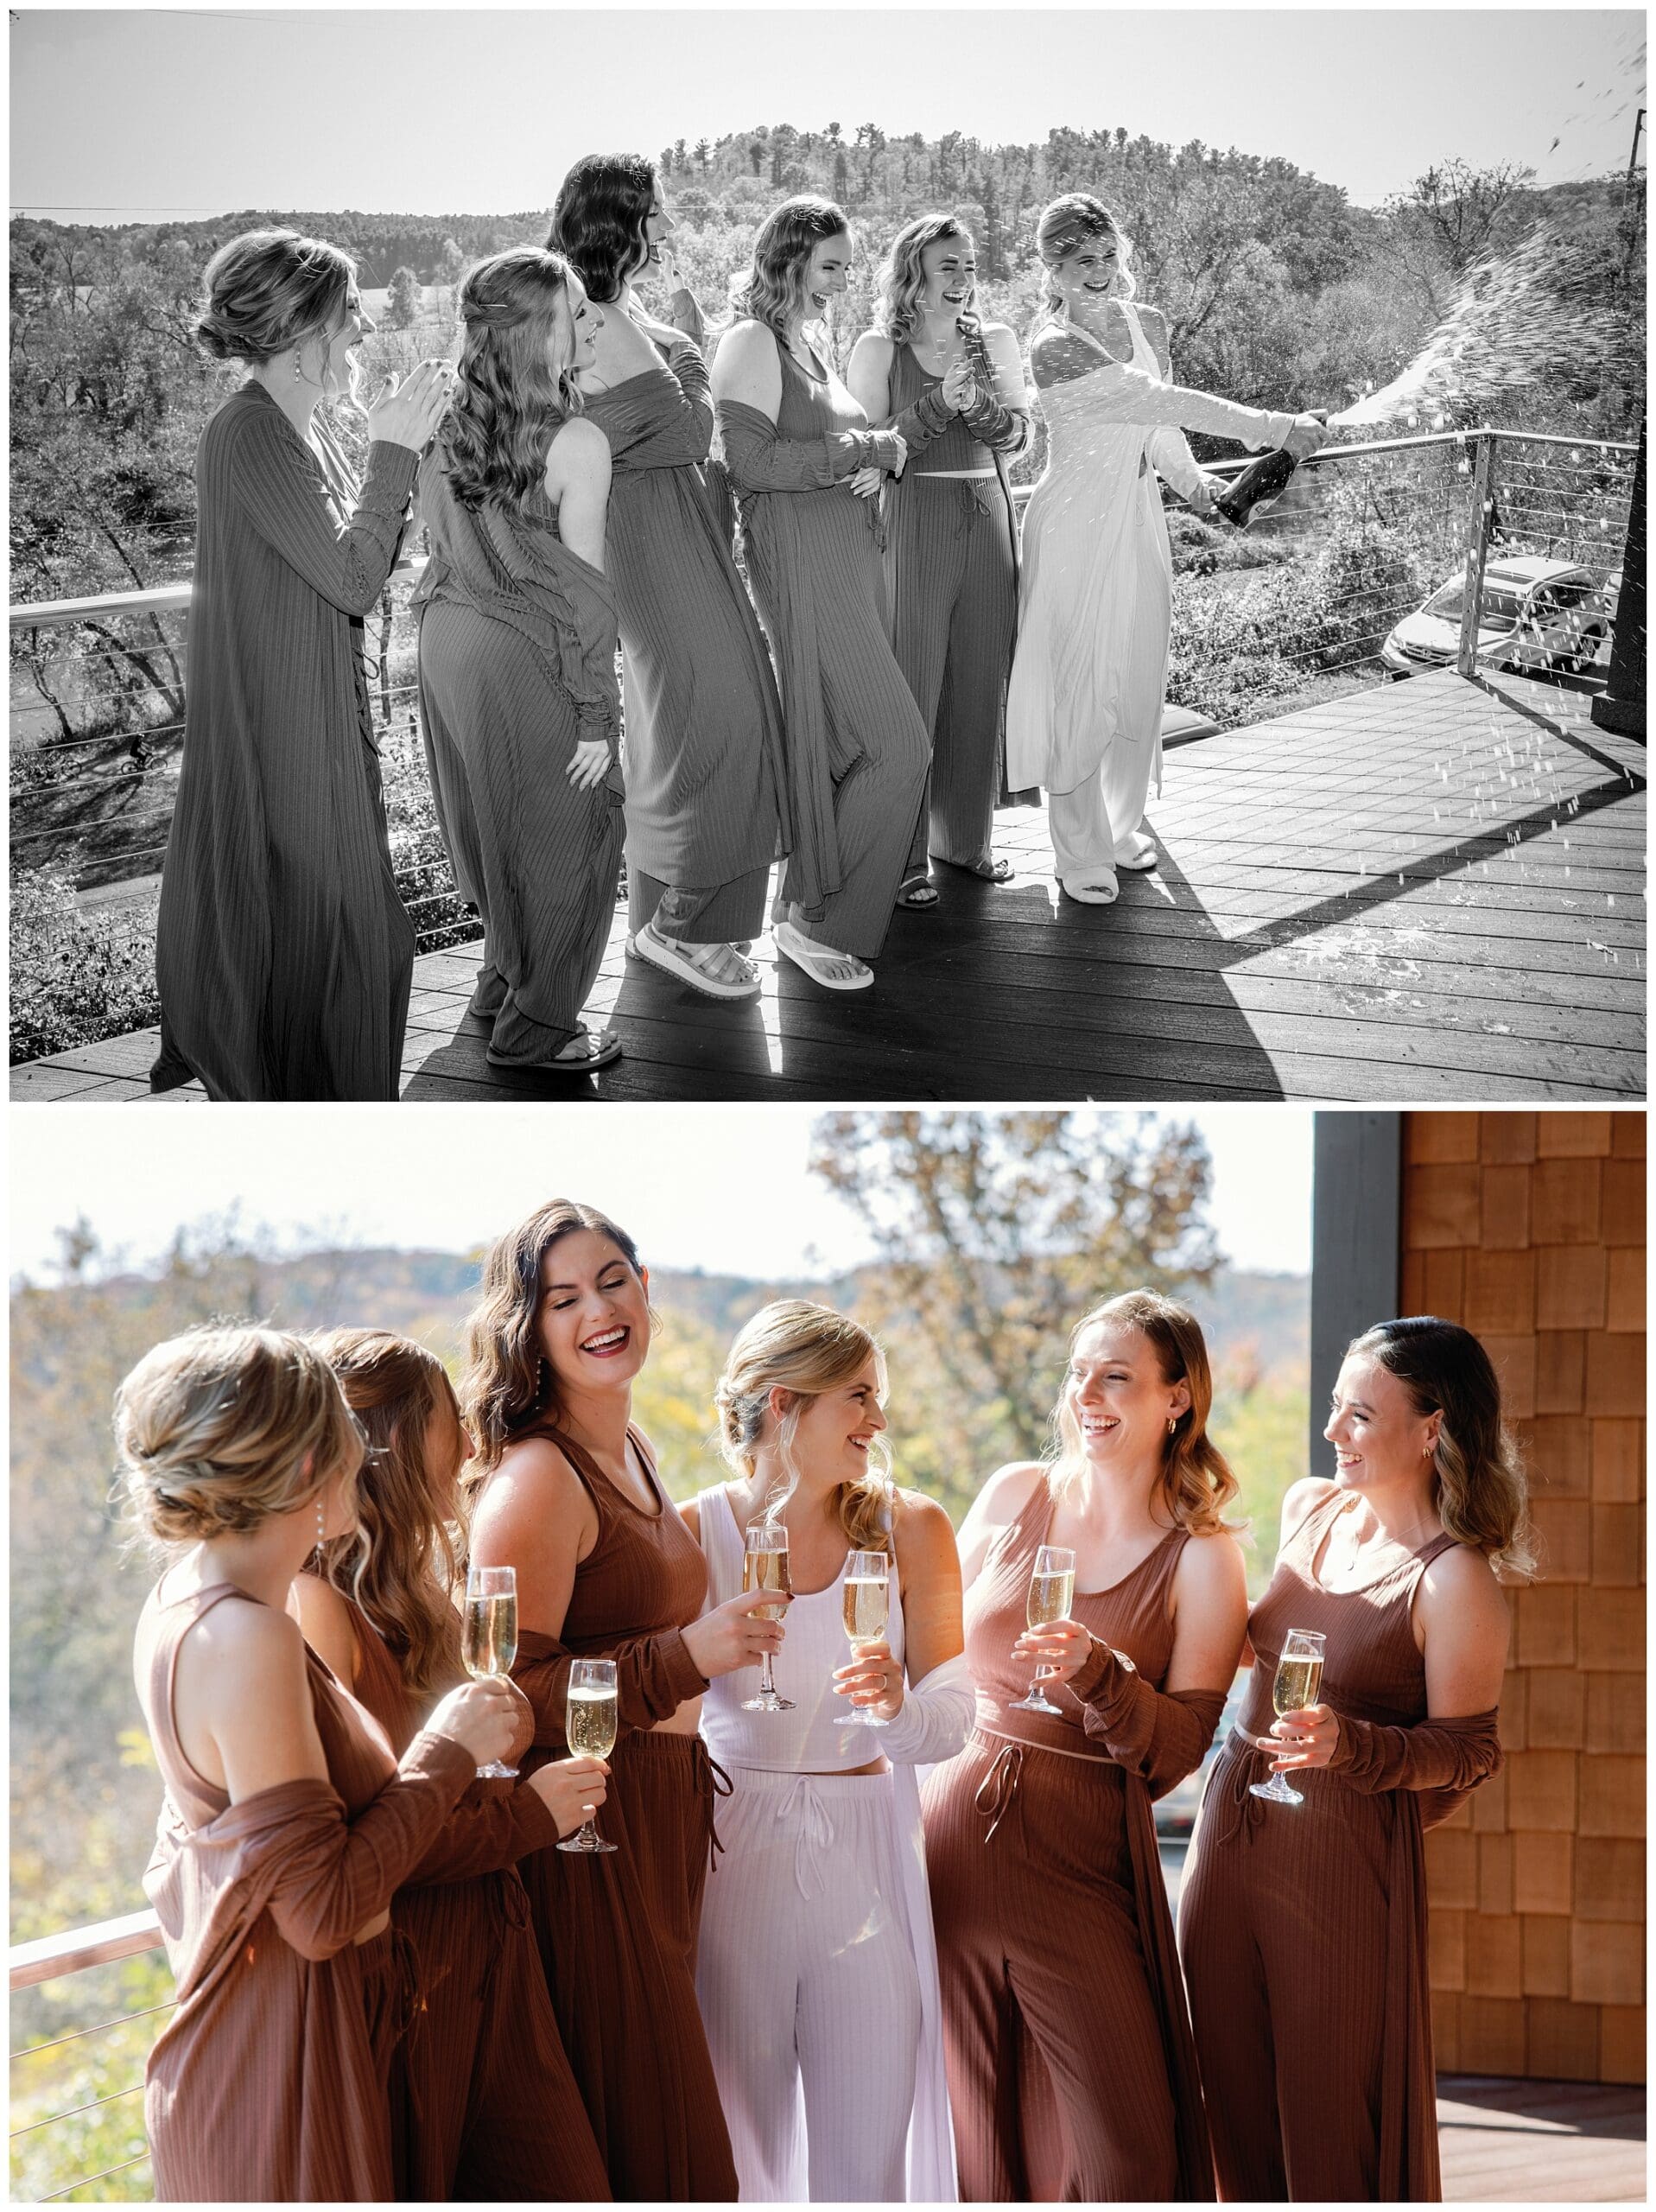 The bridesmaids are having a fall wedding party on the deck at crest center.